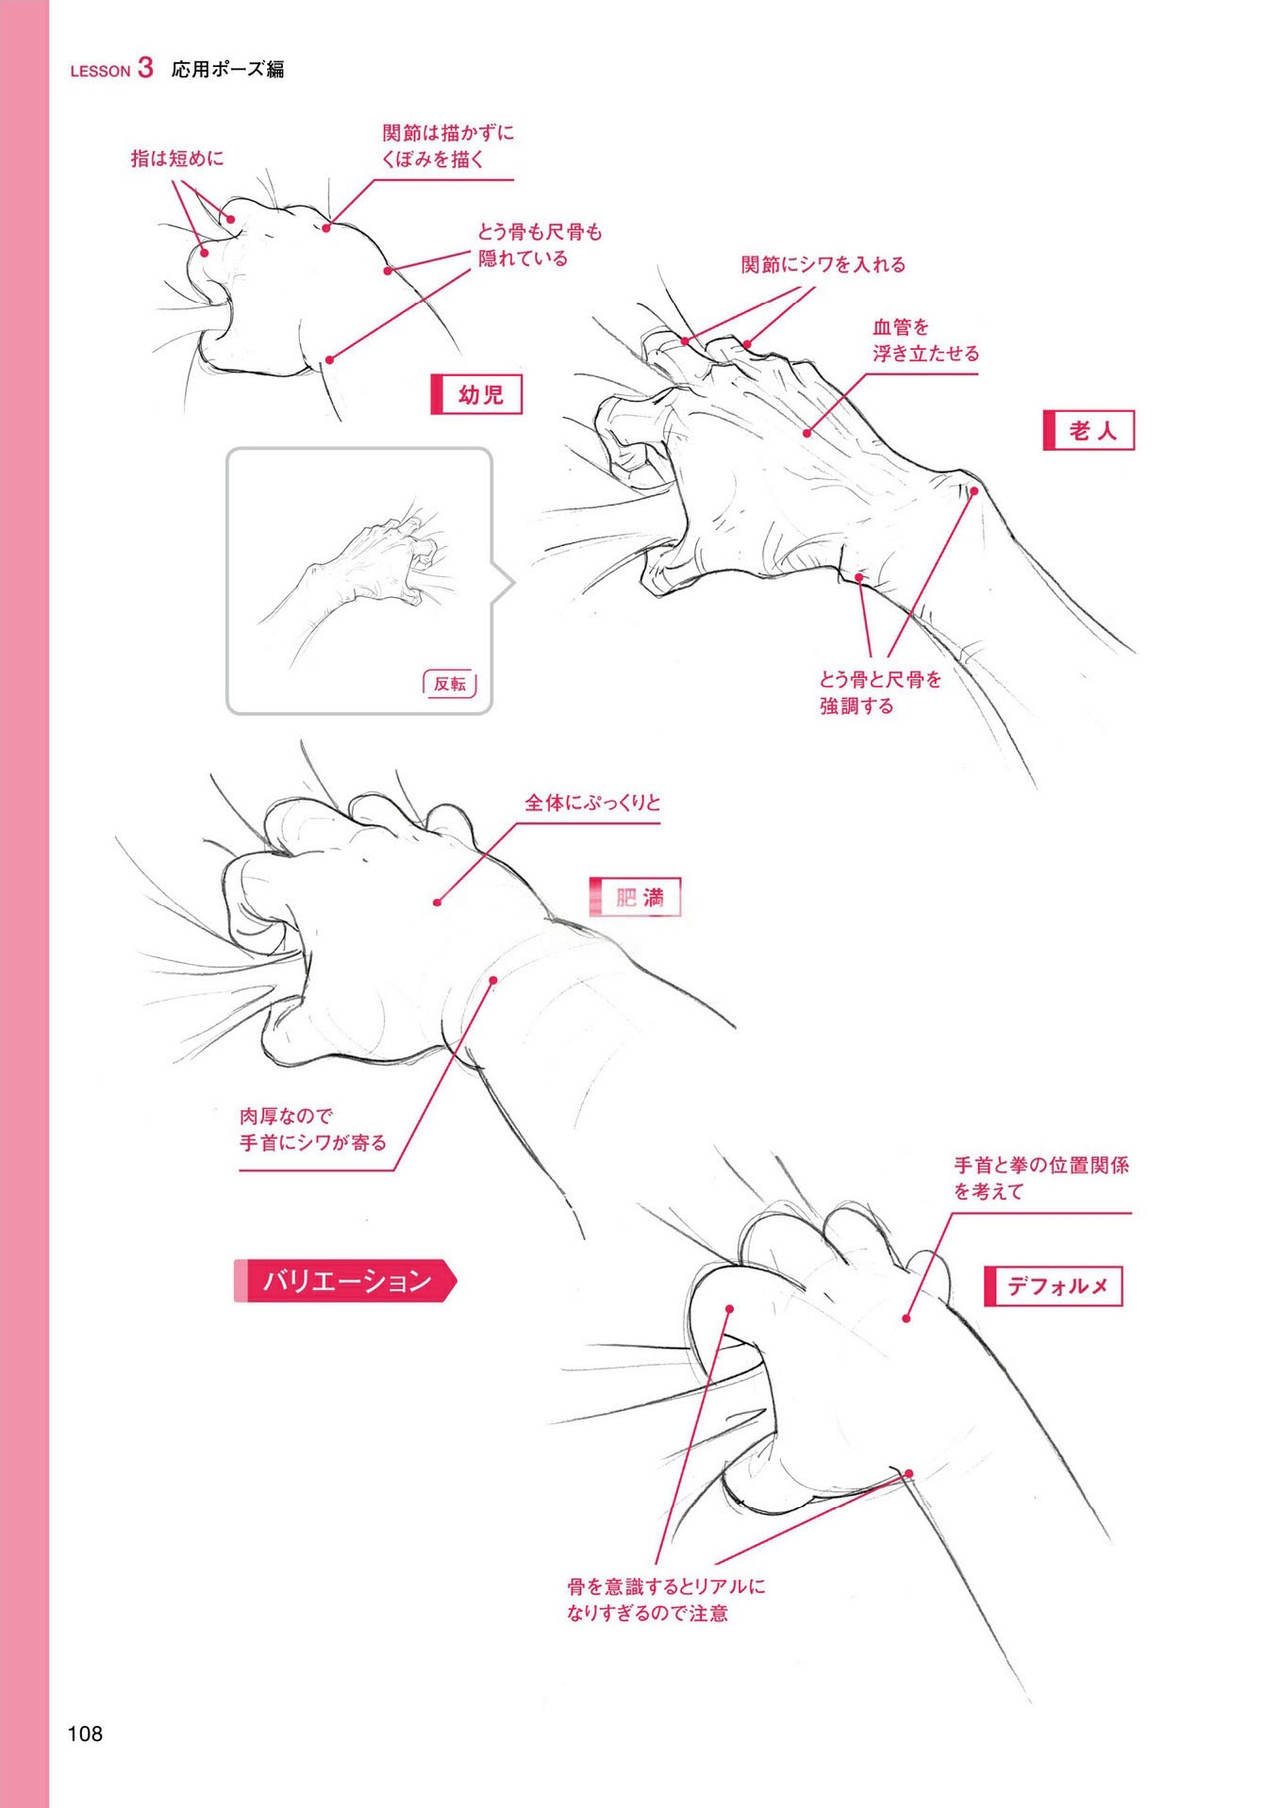 How to draw hands 108